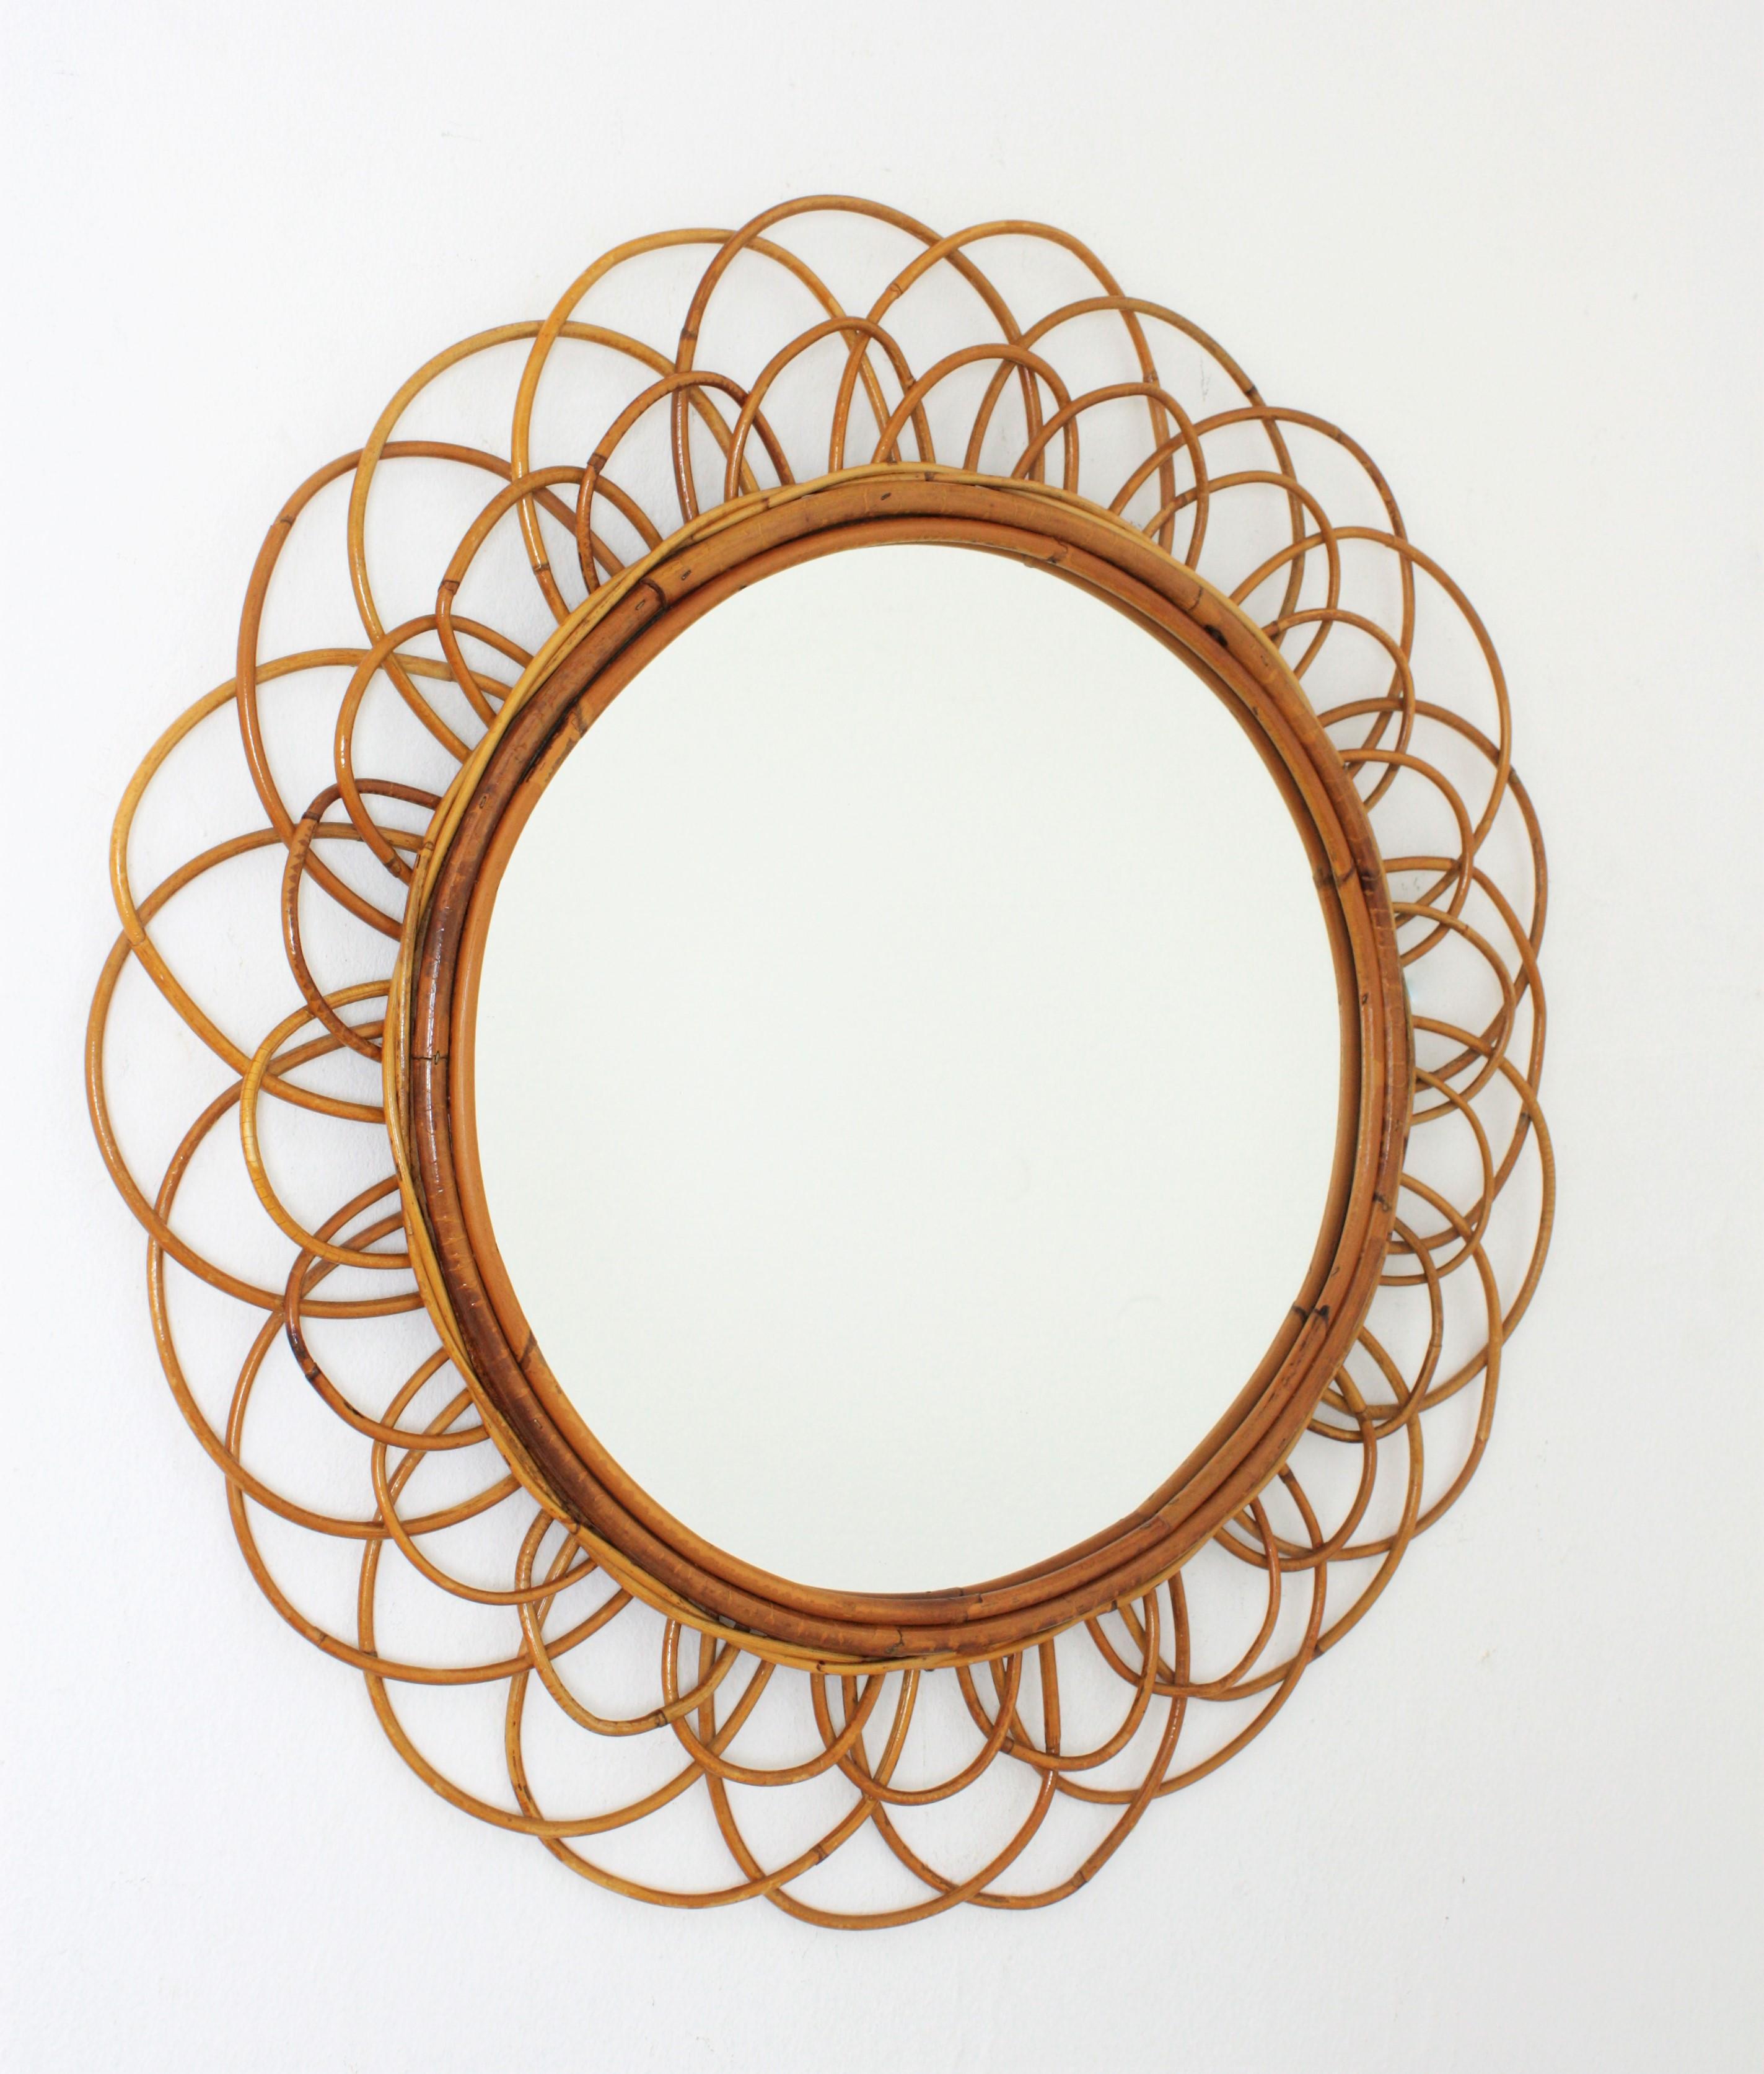 Beautiful handcrafted flower shaped rattan wicker mirror with two layers of cane petals as frame. France, 1950s-1960s
A piece will all the taste of the Mediterranean French Riviera, beautiful placed alone but also interesting combined with other